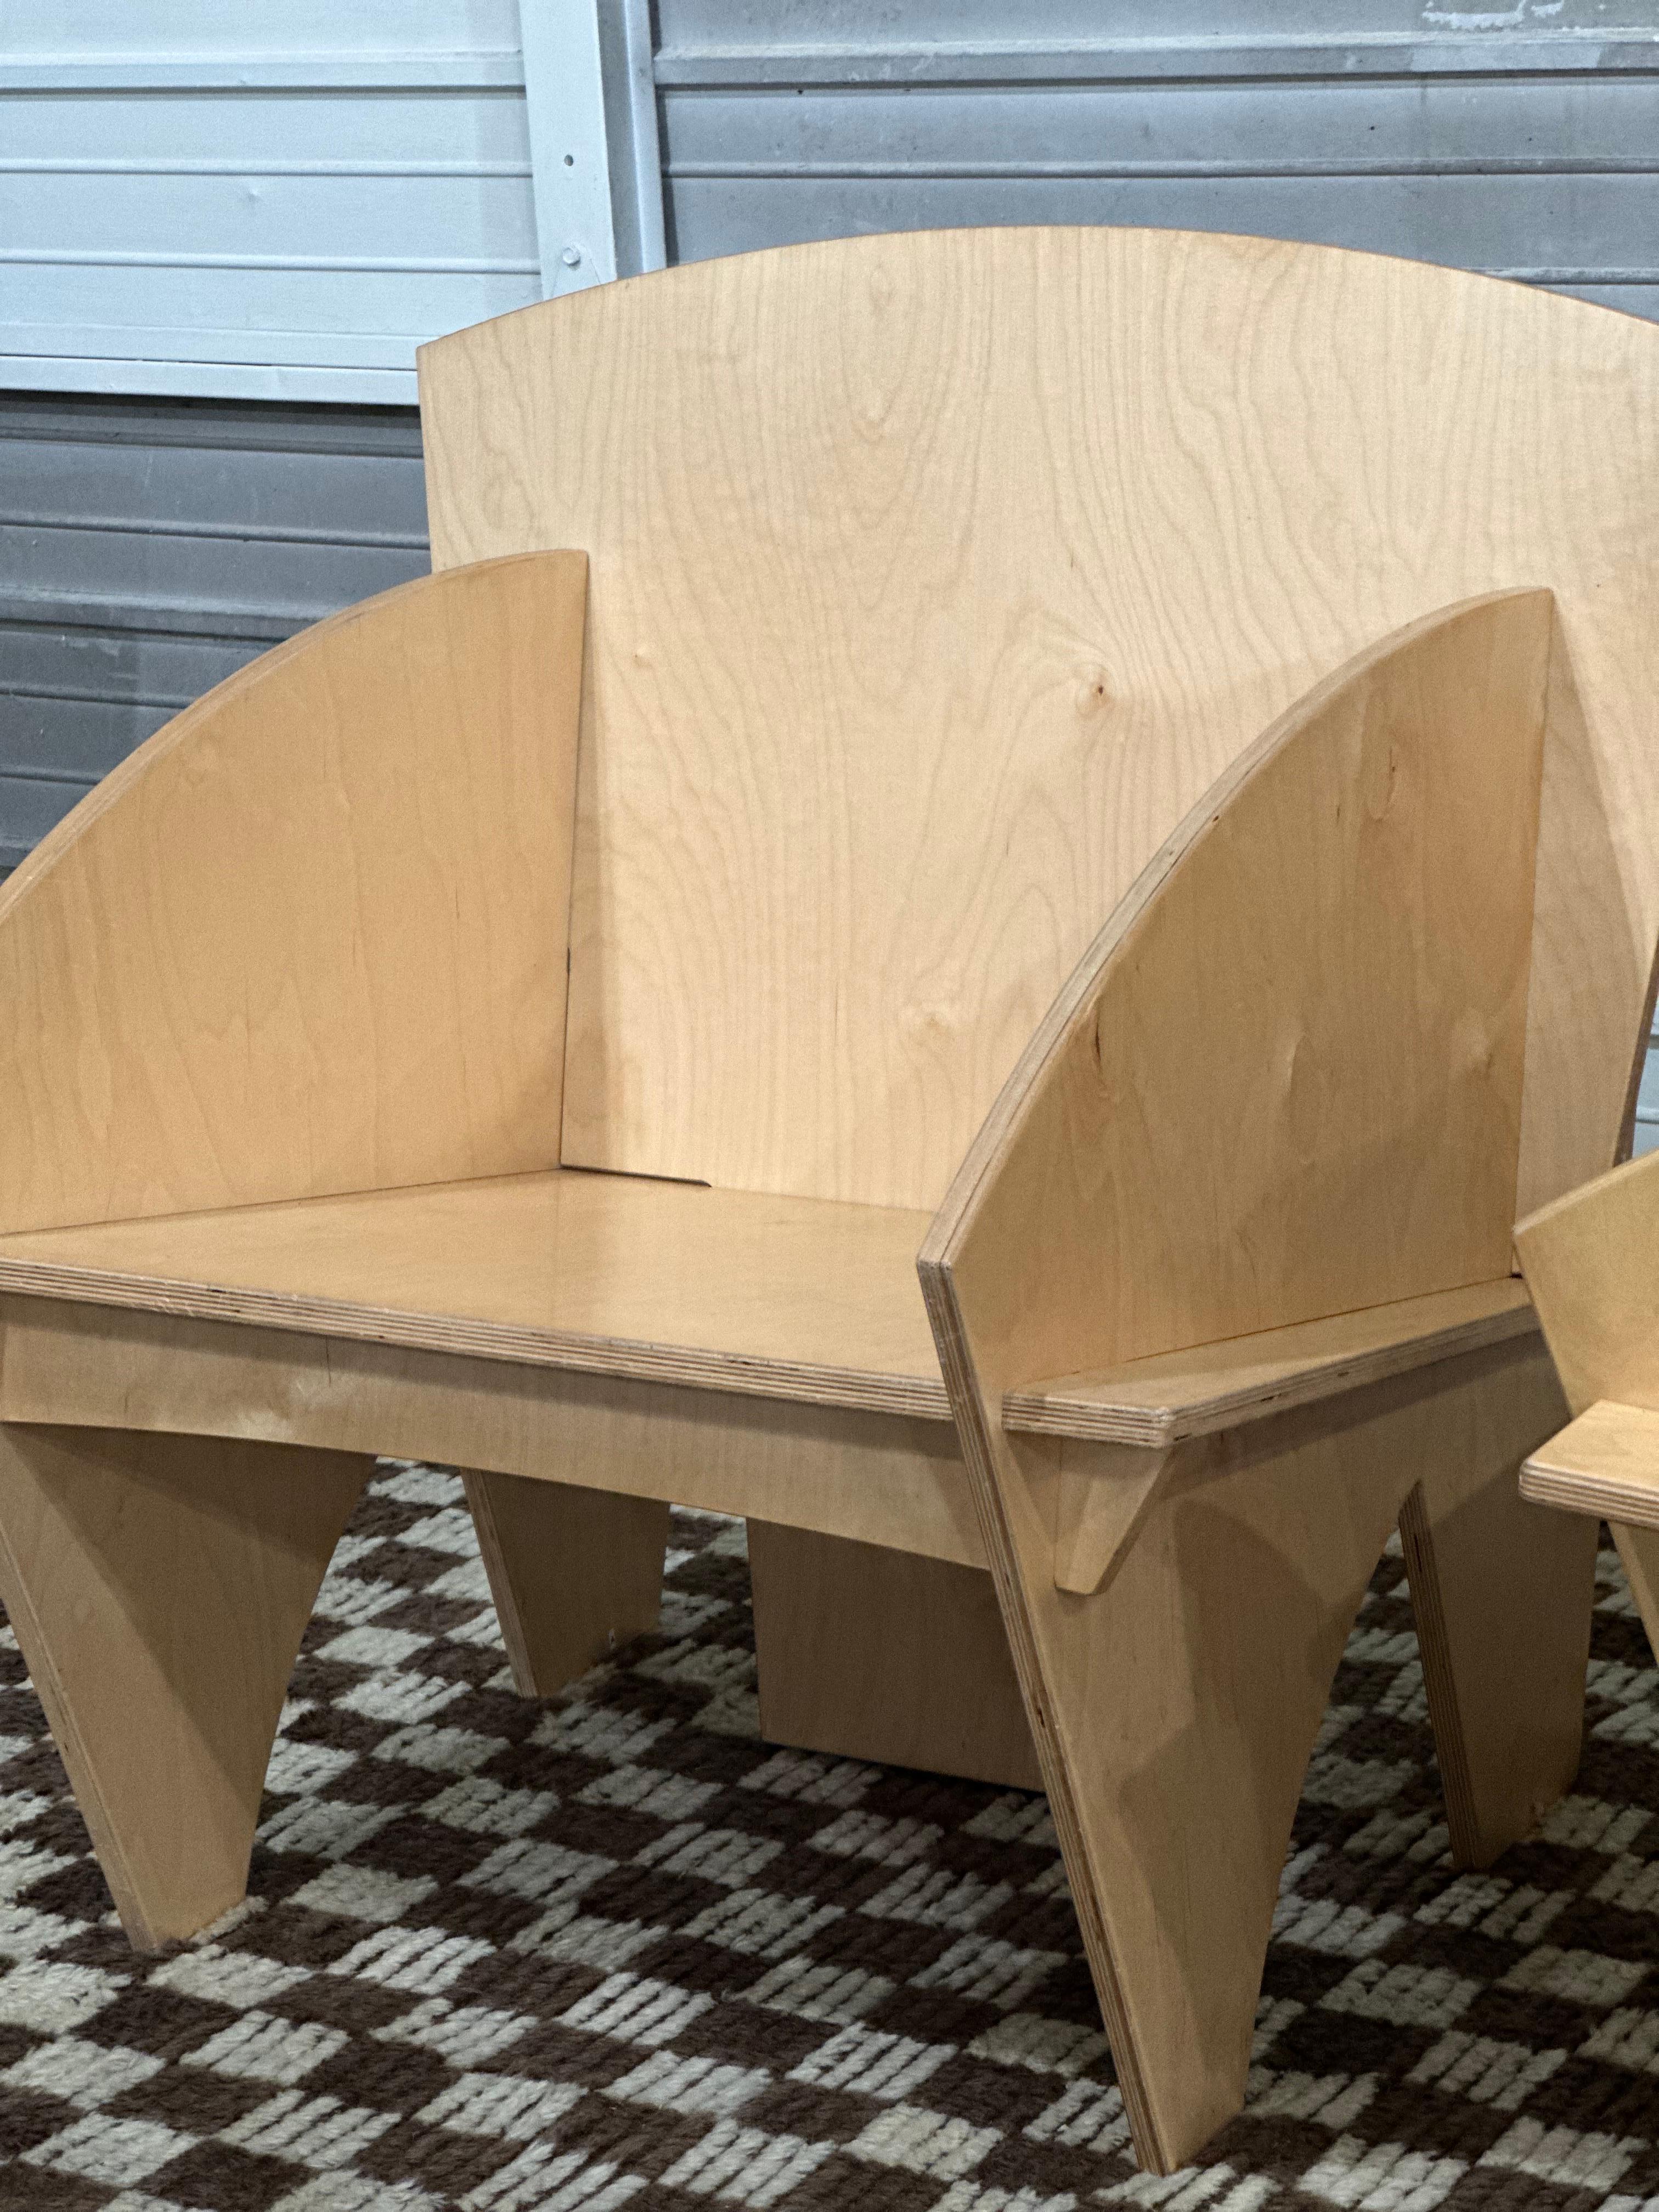 American Deconstruction Modern Plywood Puzzle Piece Chairs